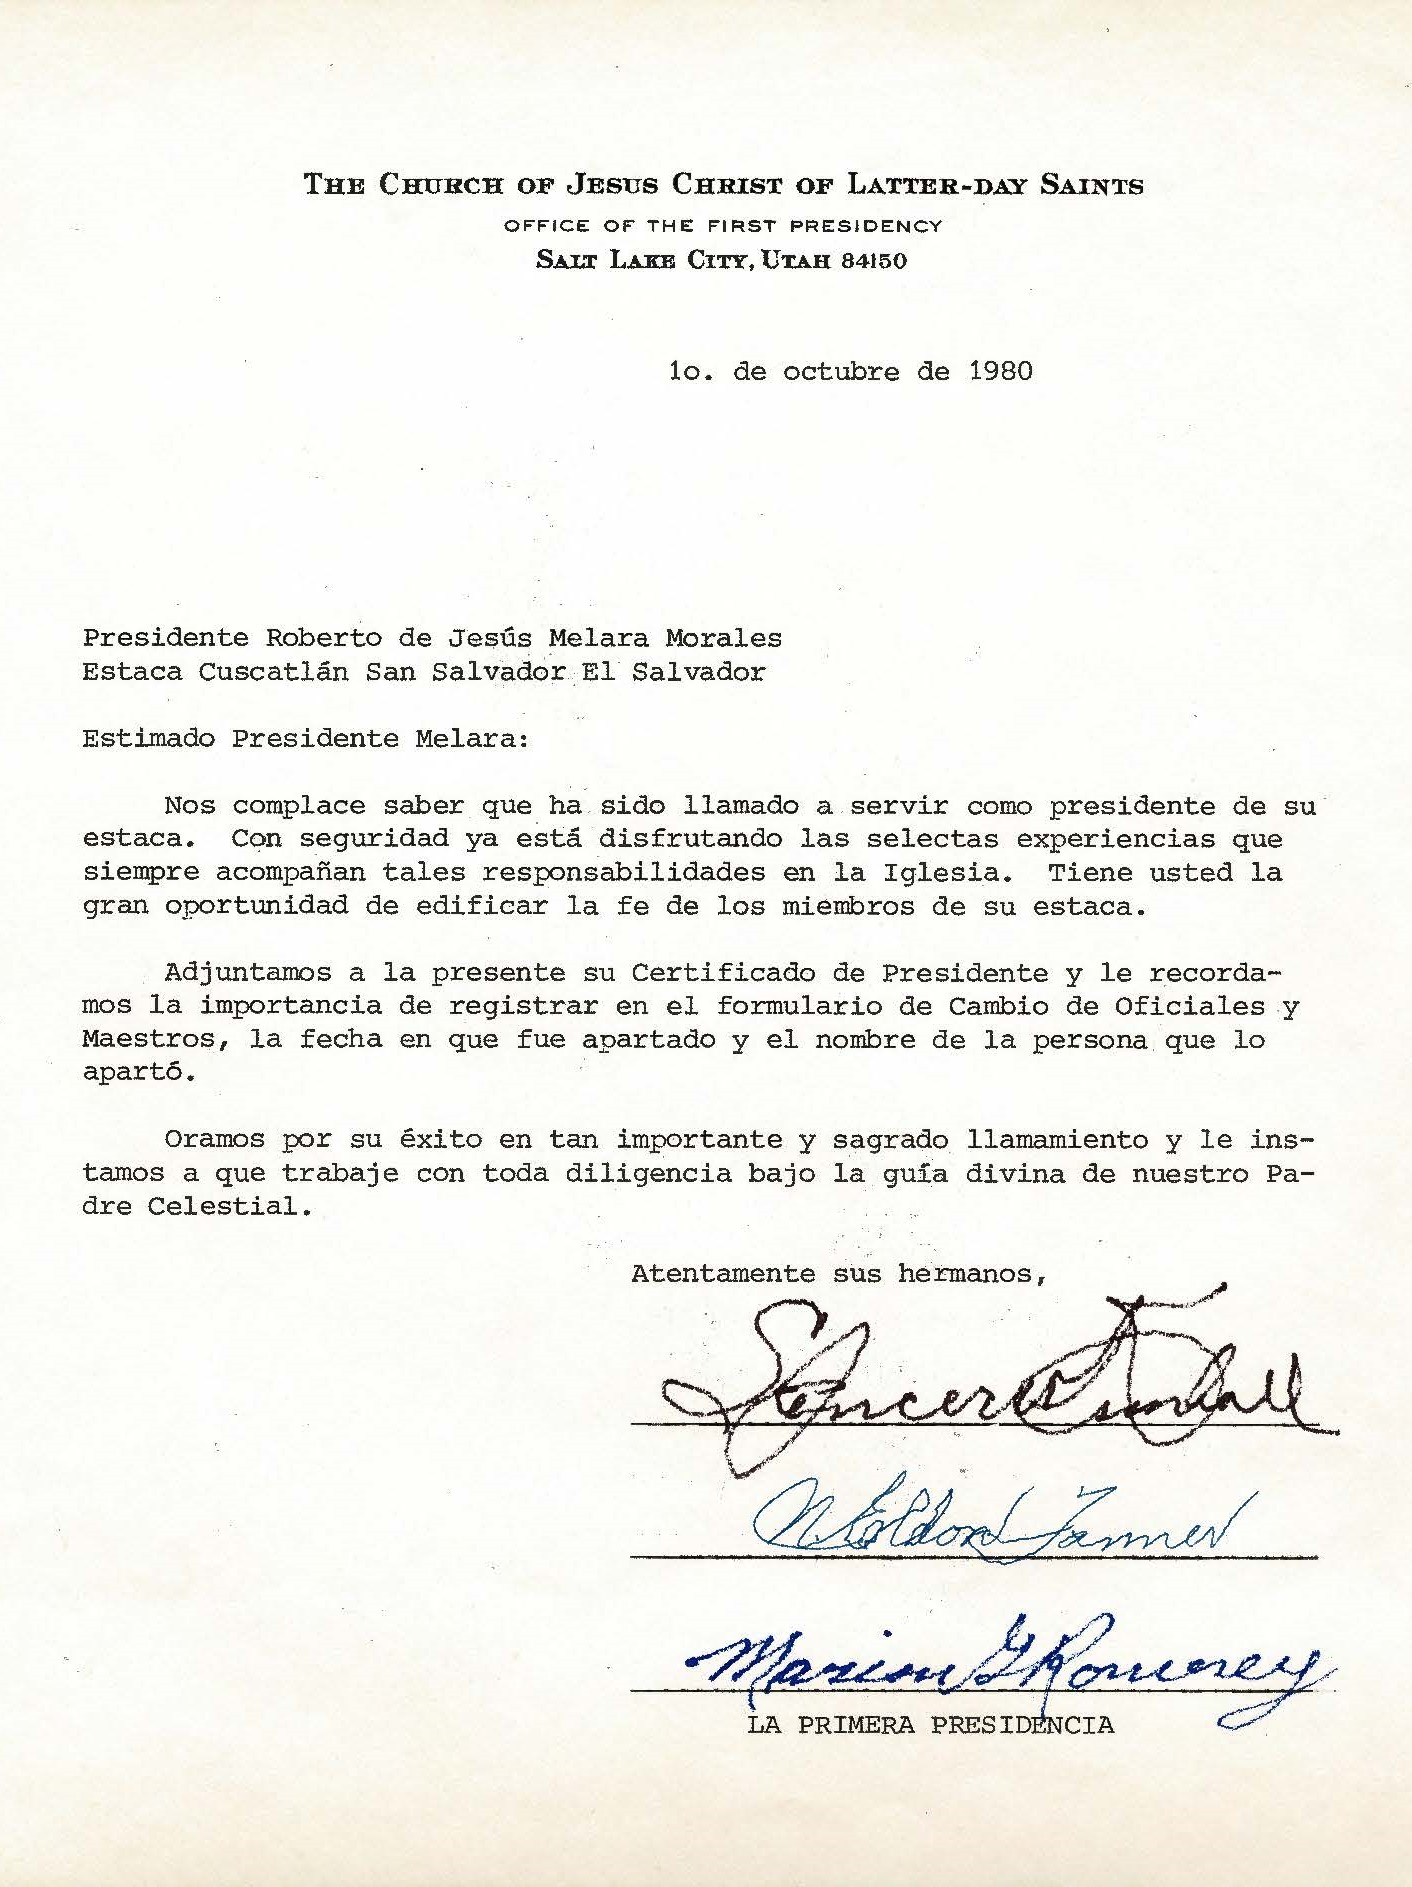 1980 letter from the First Presidency calling Roberto to be a stake president in El Salvador